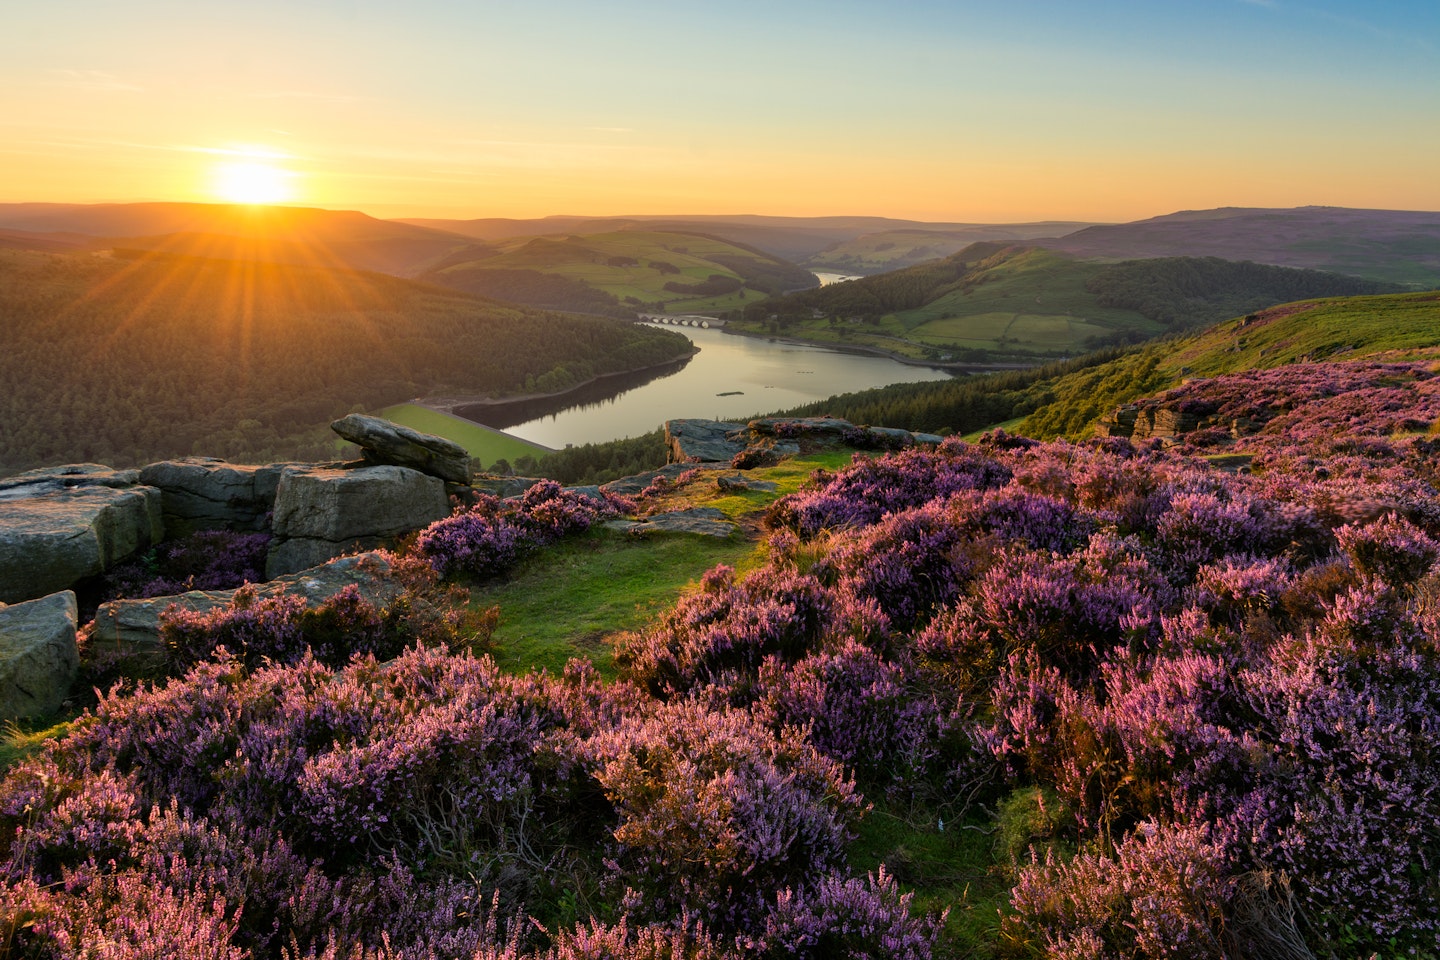 Peak District Guided Walking Holiday